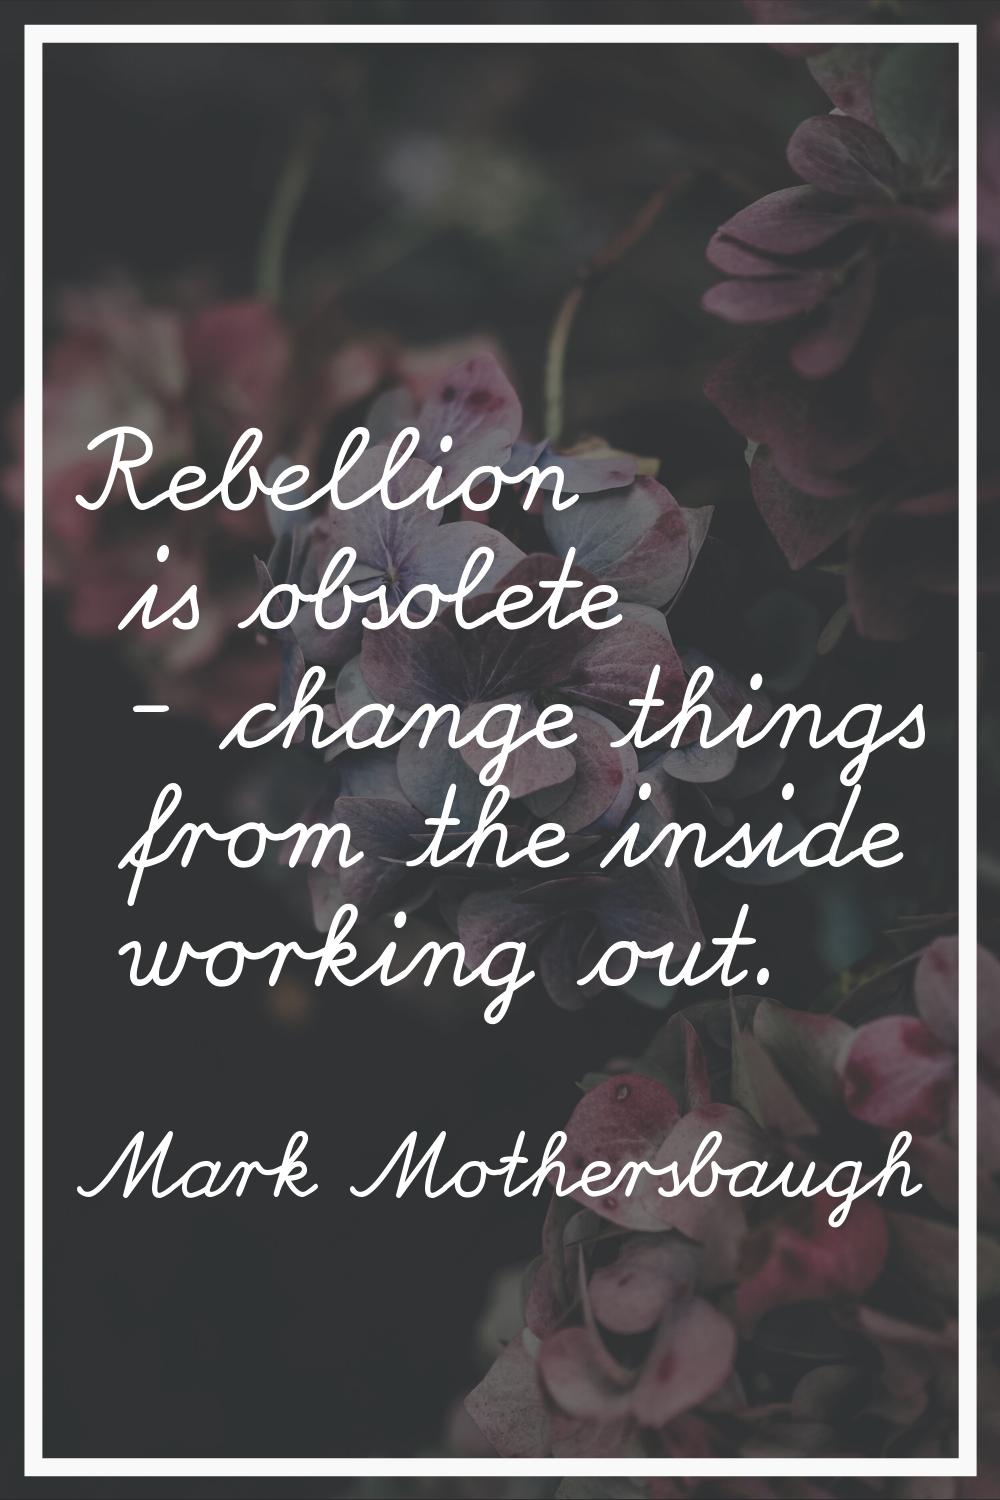 Rebellion is obsolete - change things from the inside working out.